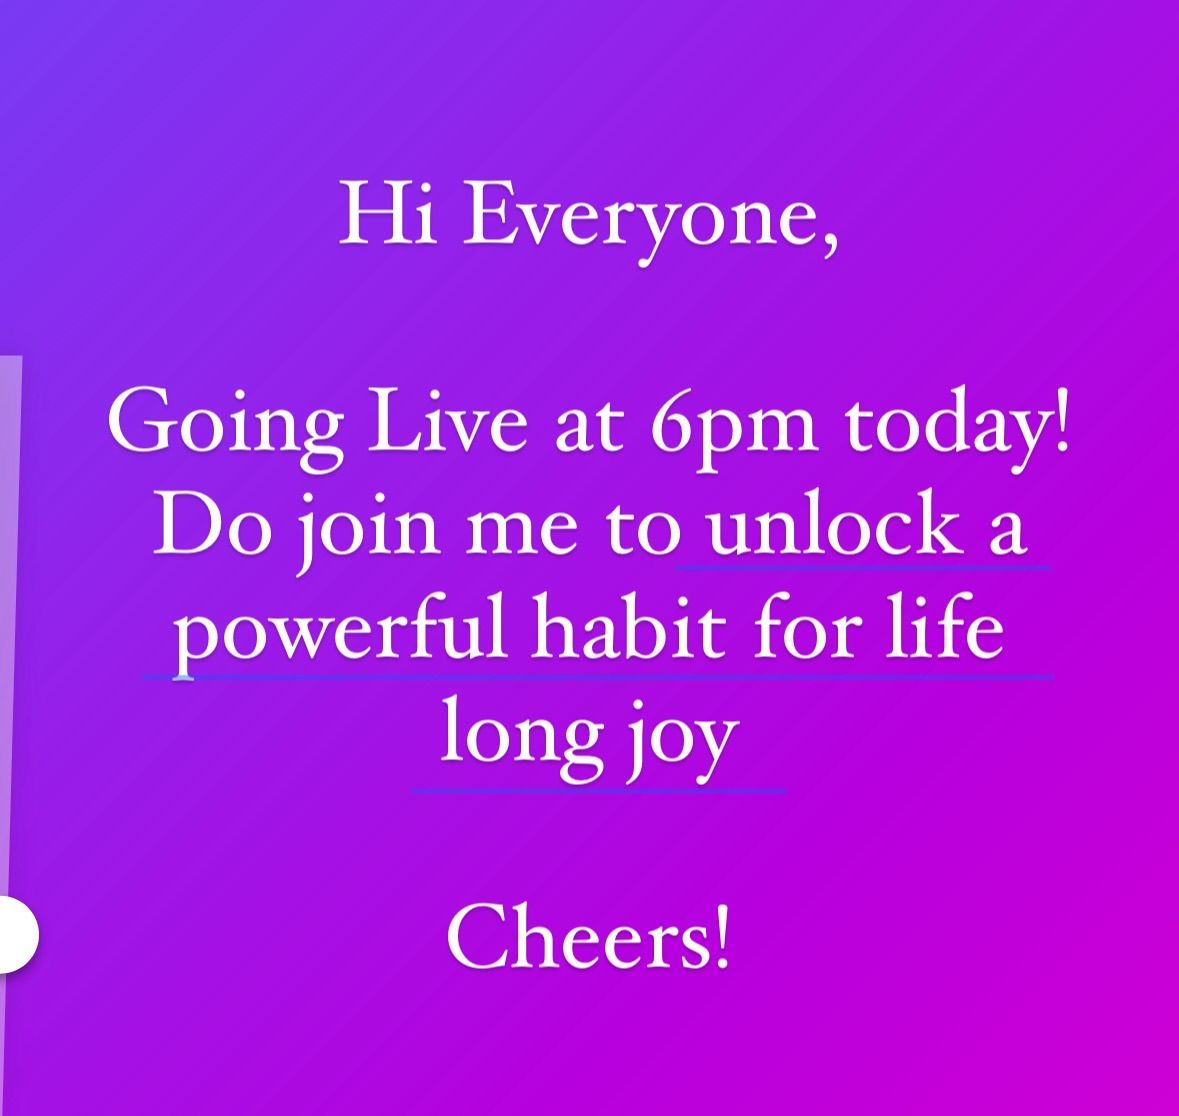 Going Live at 6pm today! 

Do join me to unlock a powerful habit for life long joy. 